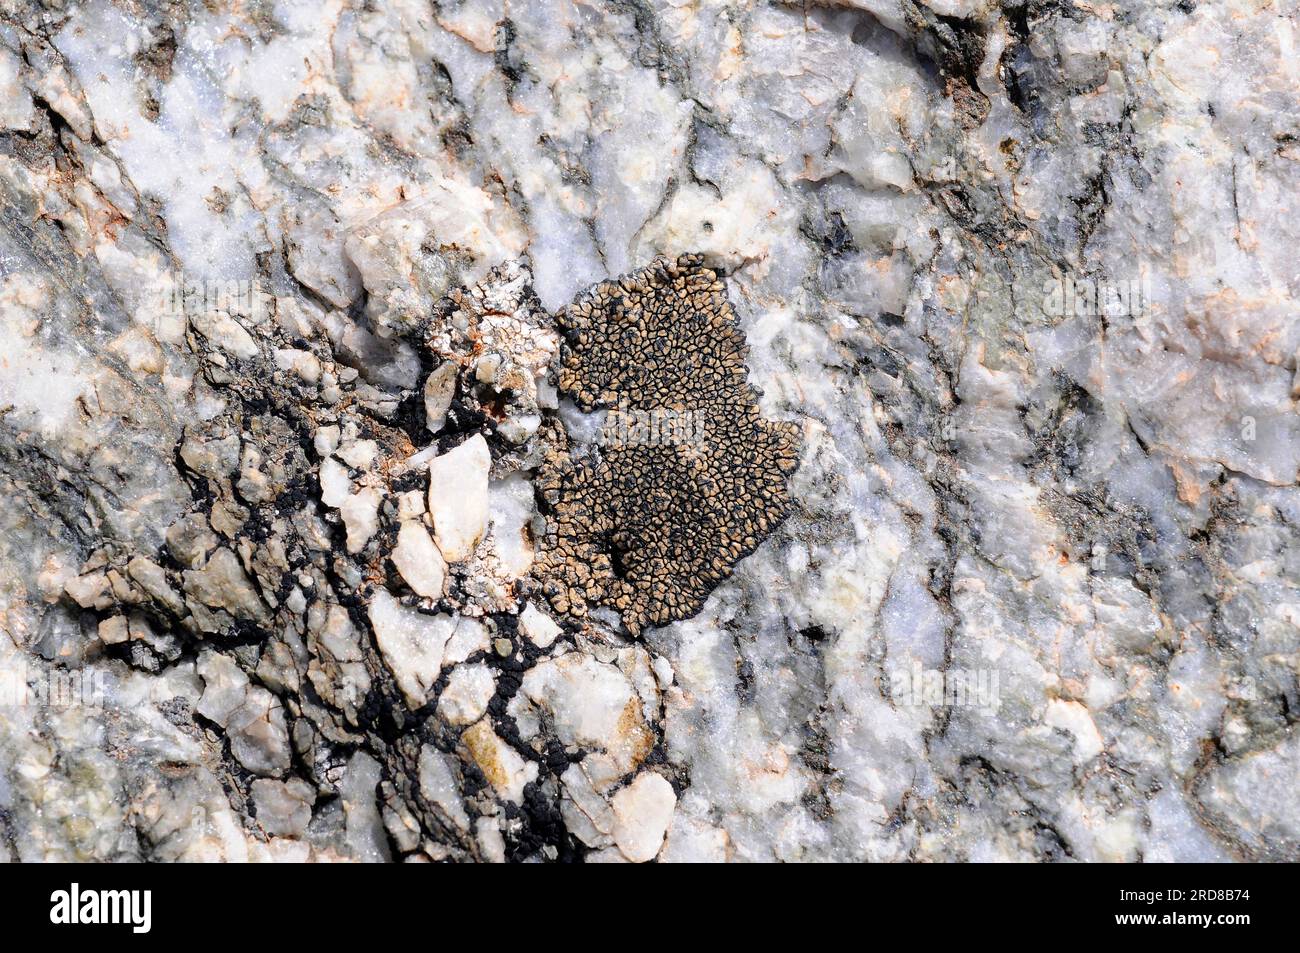 Lecidea atrobrunnea is a crustose lichen native to the mountains of North America and Europe. It grows on siliceous rocks. Ascomycota. Lecideaceae. Th Stock Photo